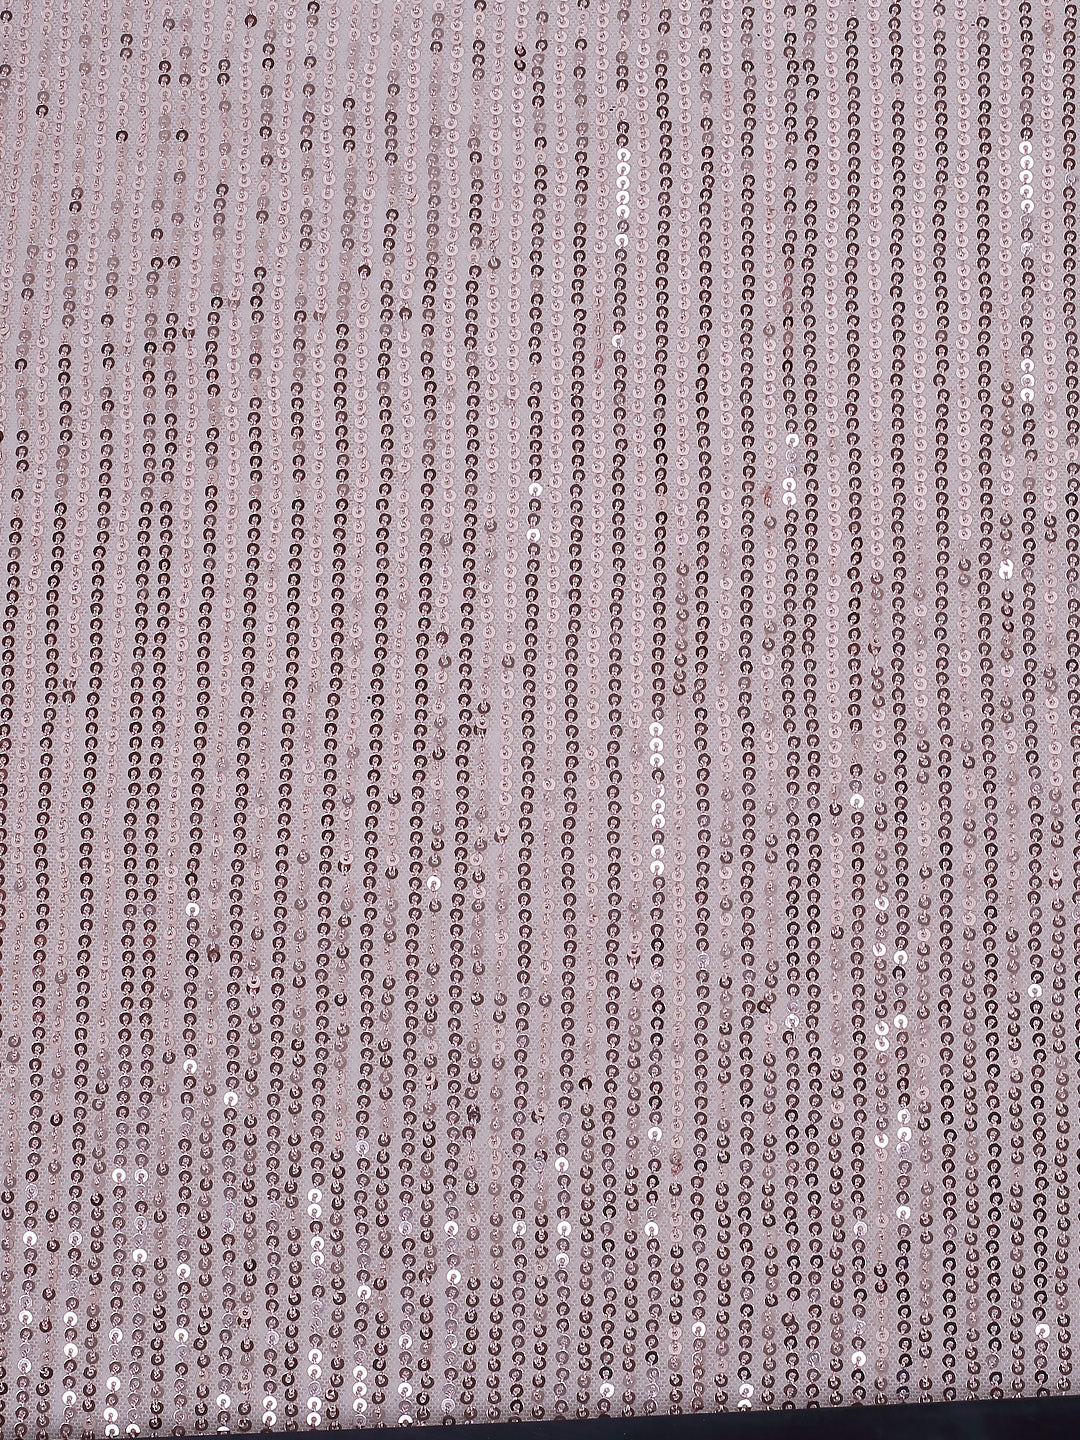 Rose Gold Stretchable Net Fabric With Sequin